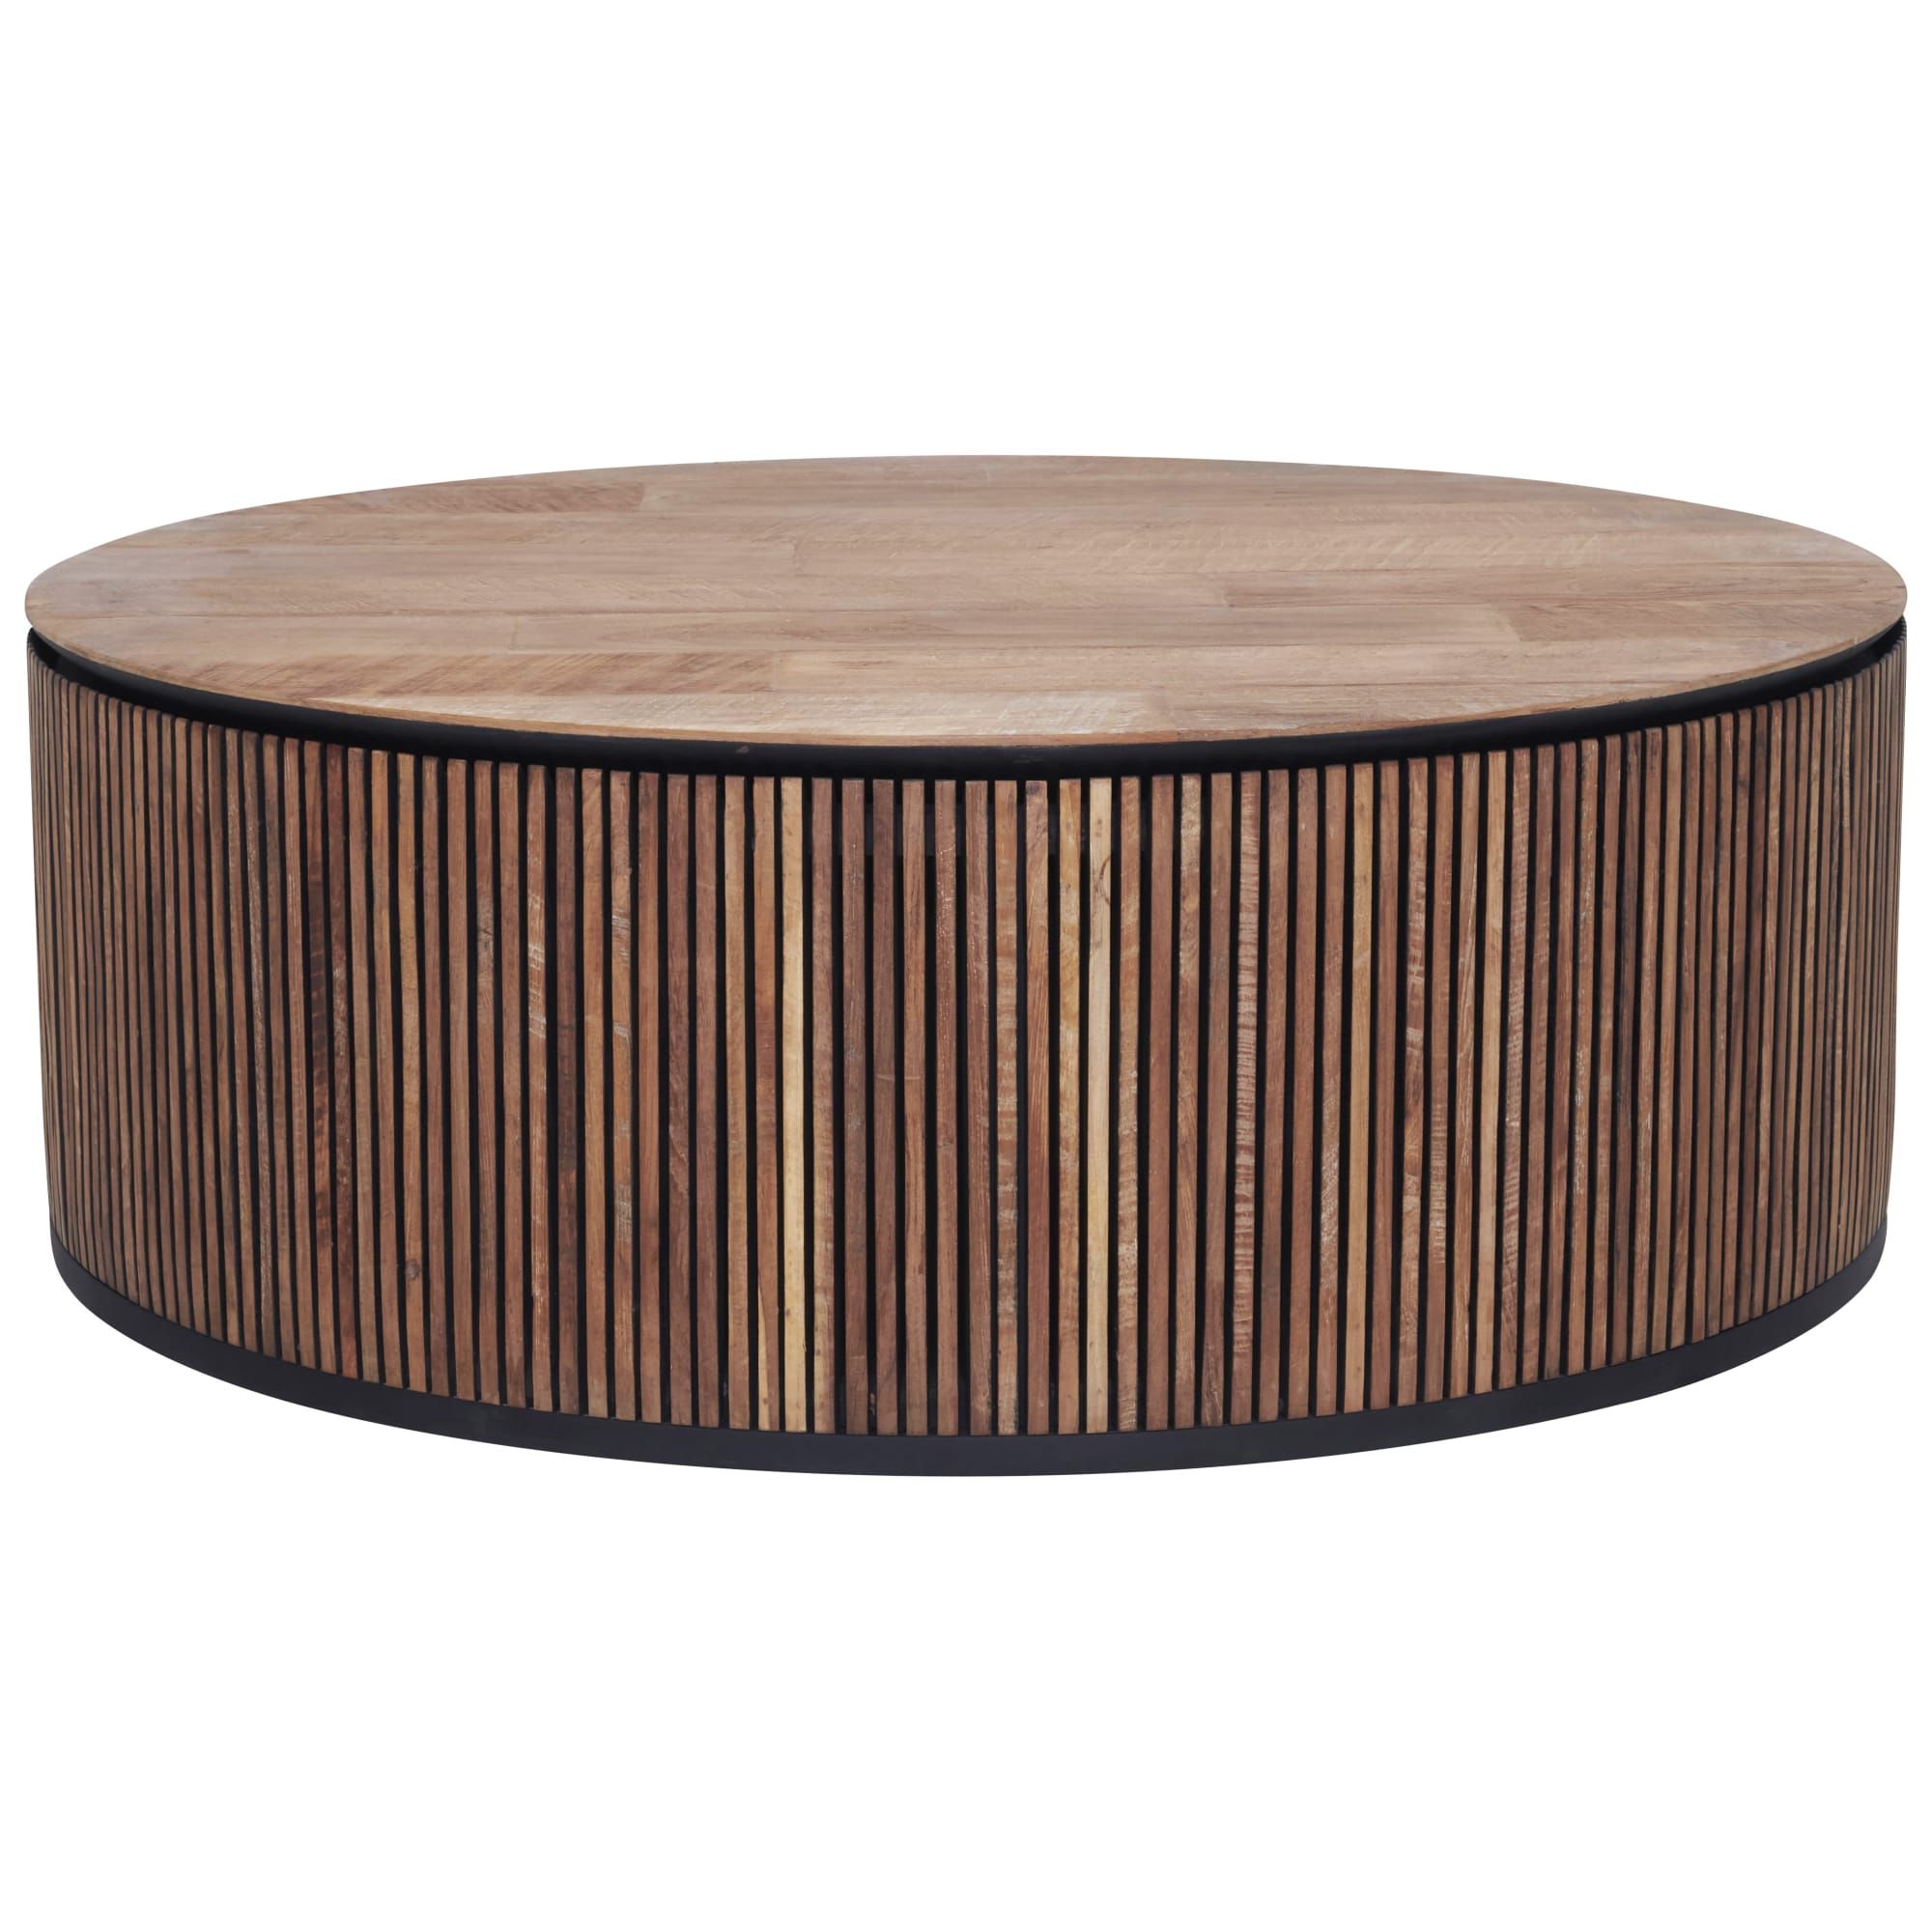 Monaco Round Coffee Tables In Fashionable Monaco Coffee Table In Reclaimed Teakozdesignfurniture (View 11 of 15)